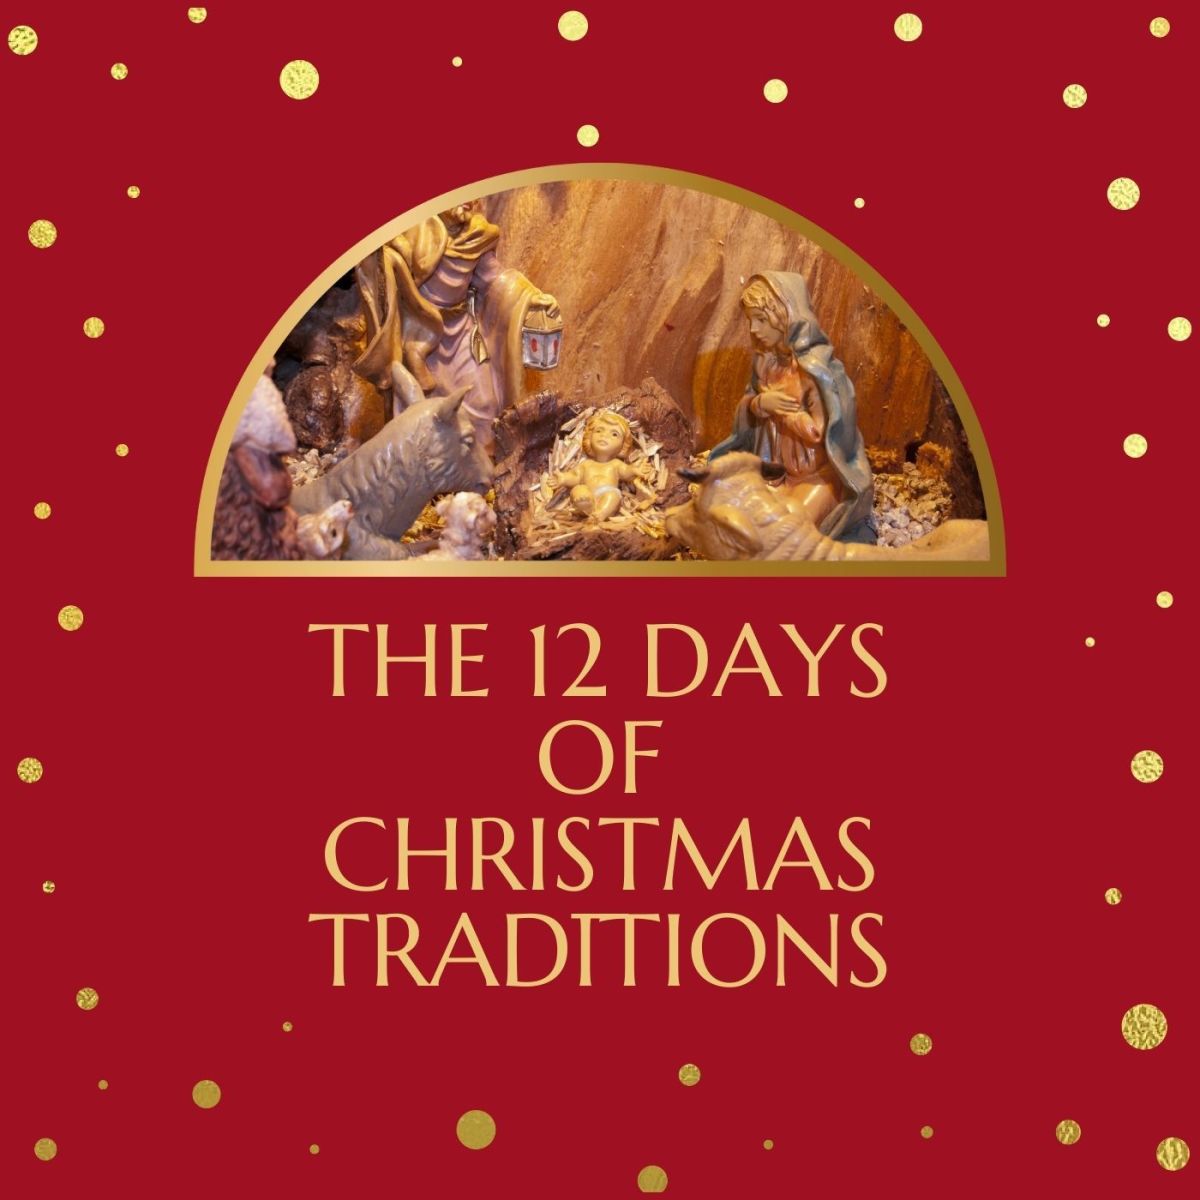 Curious about different 12 Days of Christmas traditions?